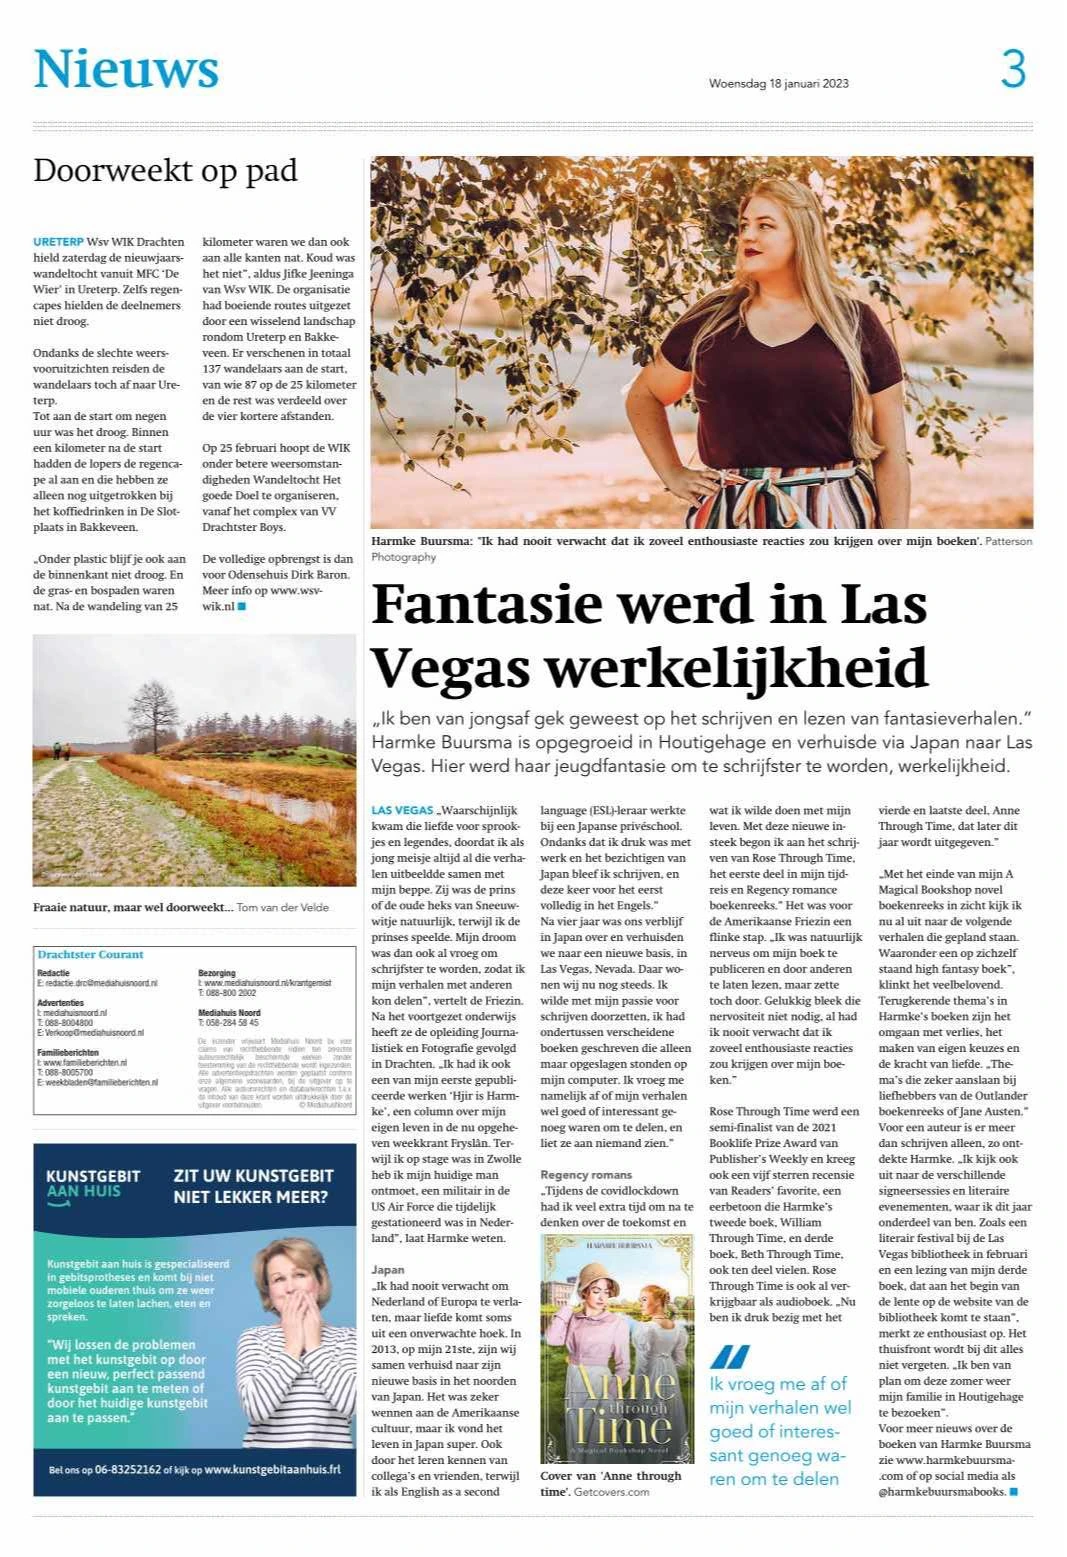 Feature in the Drachtster Courant (Dutch Newspaper)